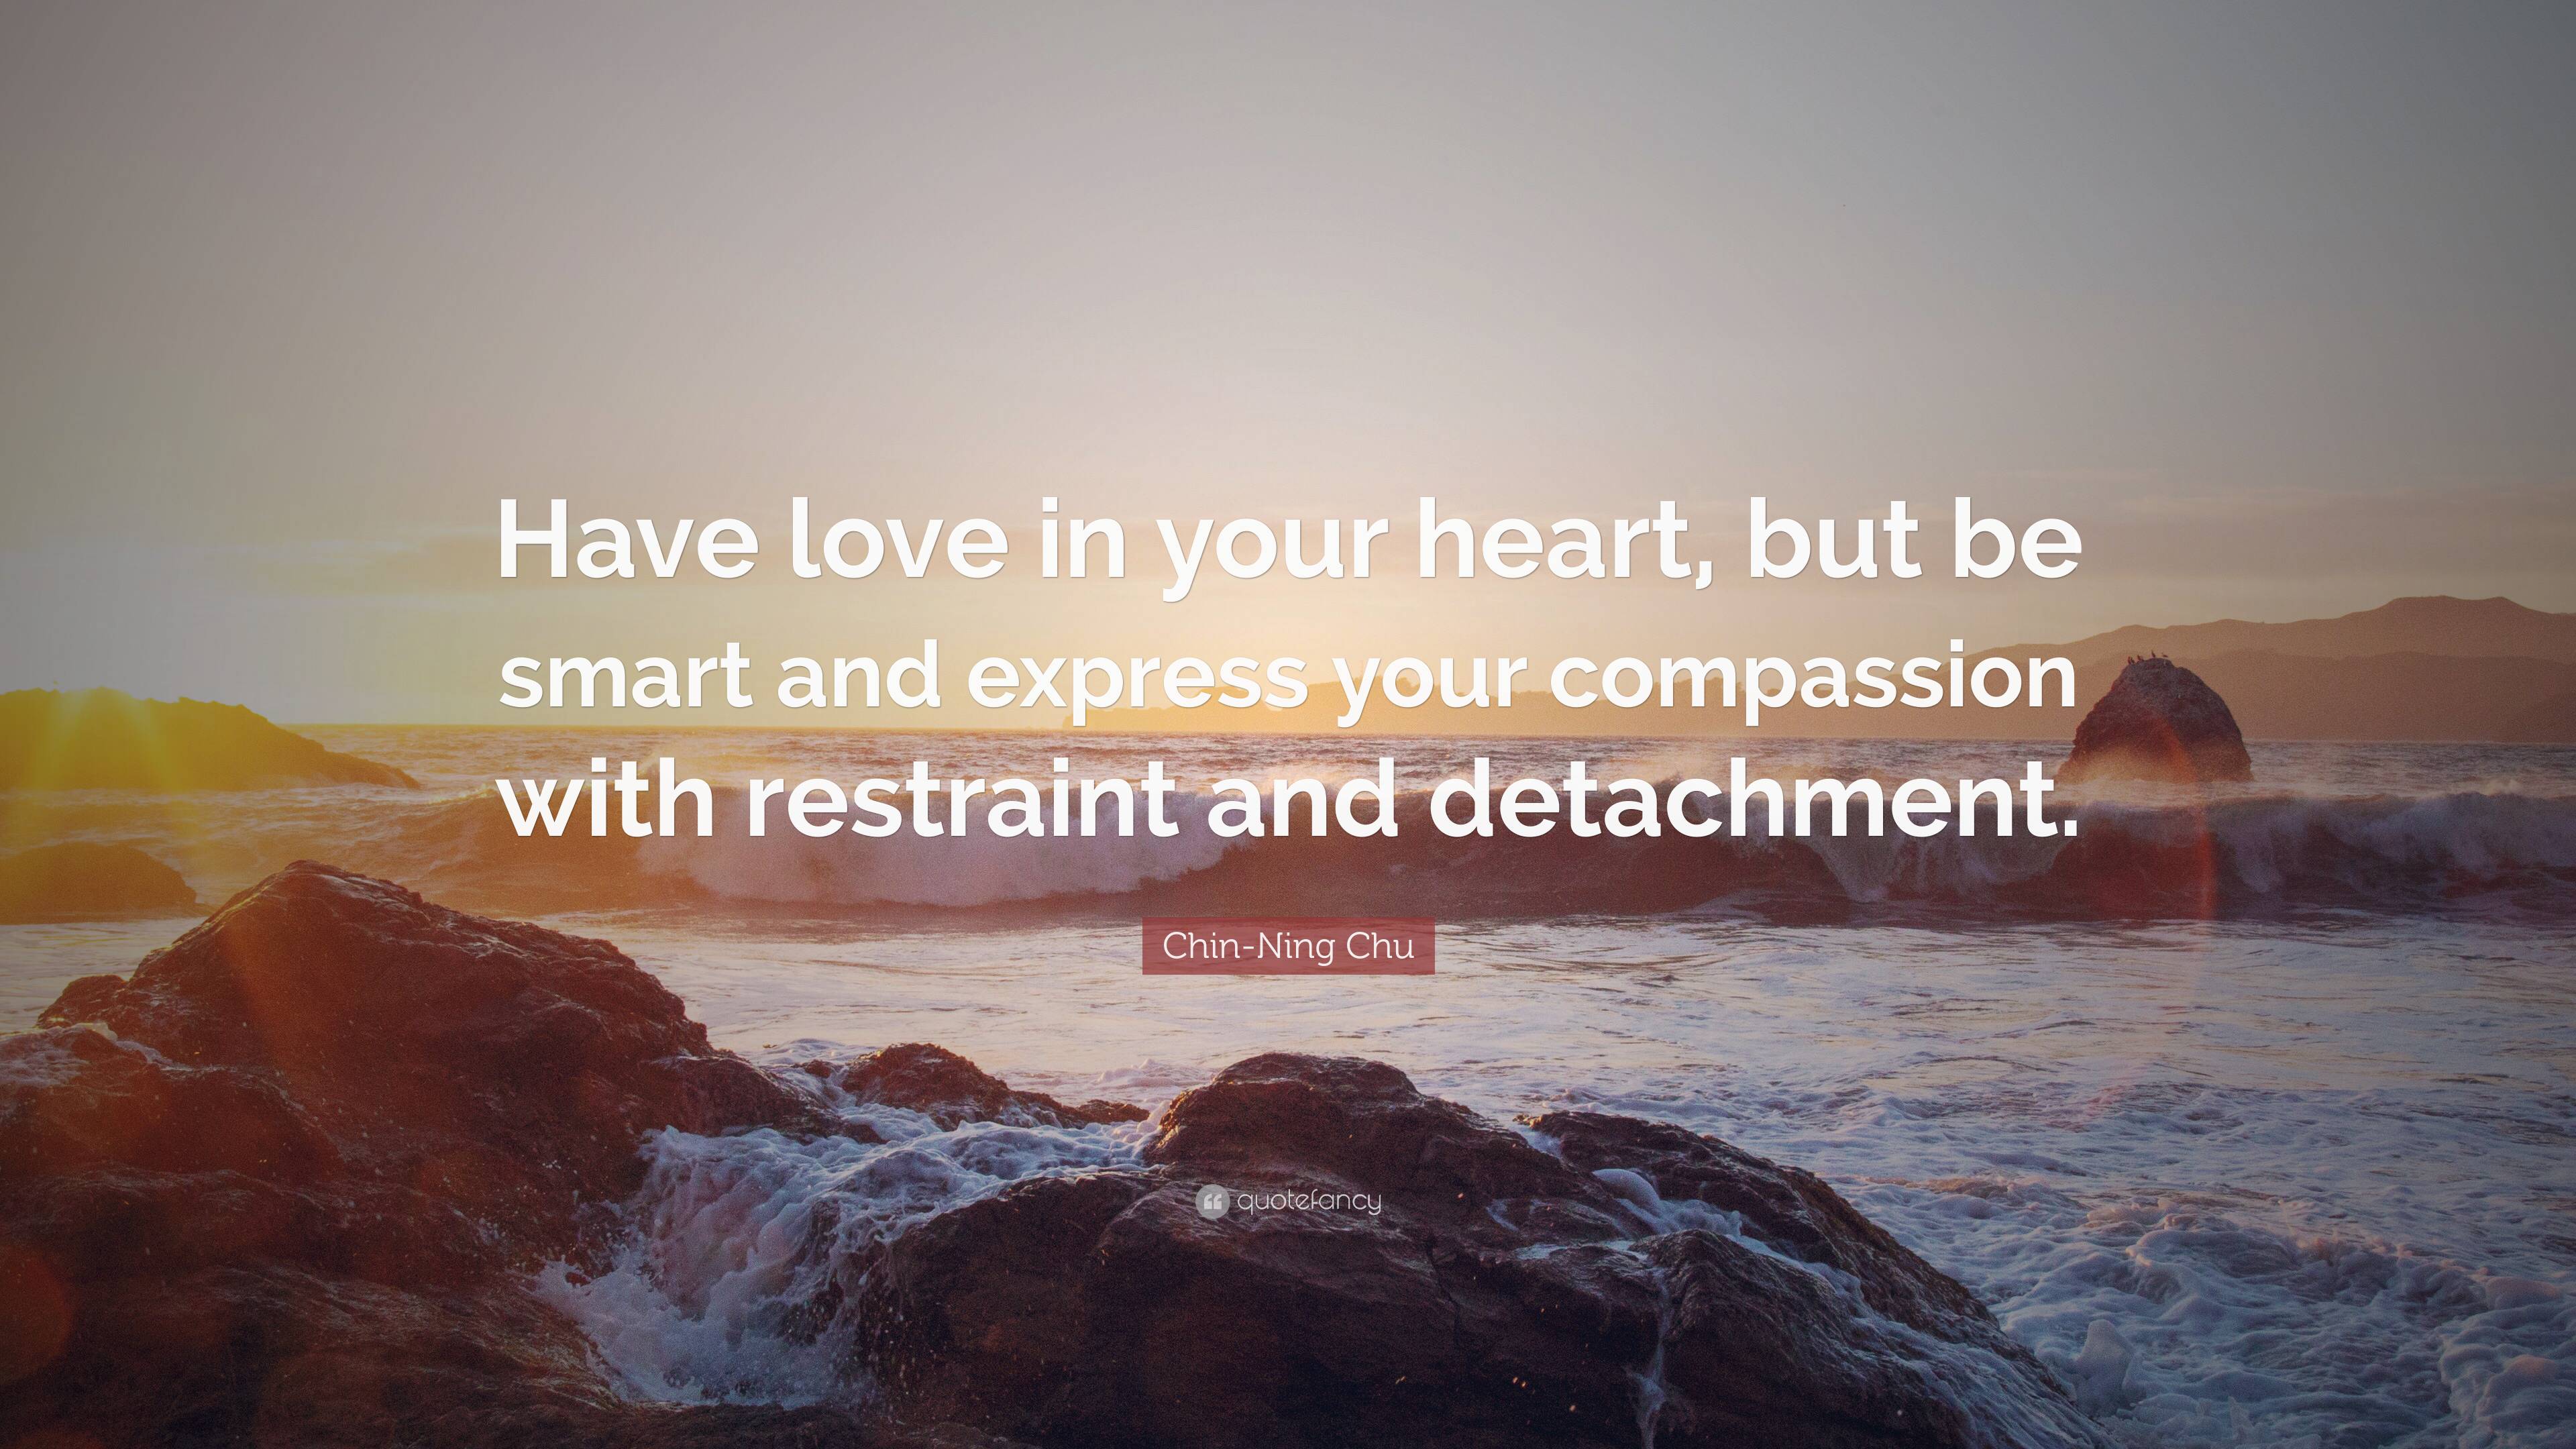 Chin-Ning Chu Quote: “Have love in your heart, but be smart and express  your compassion